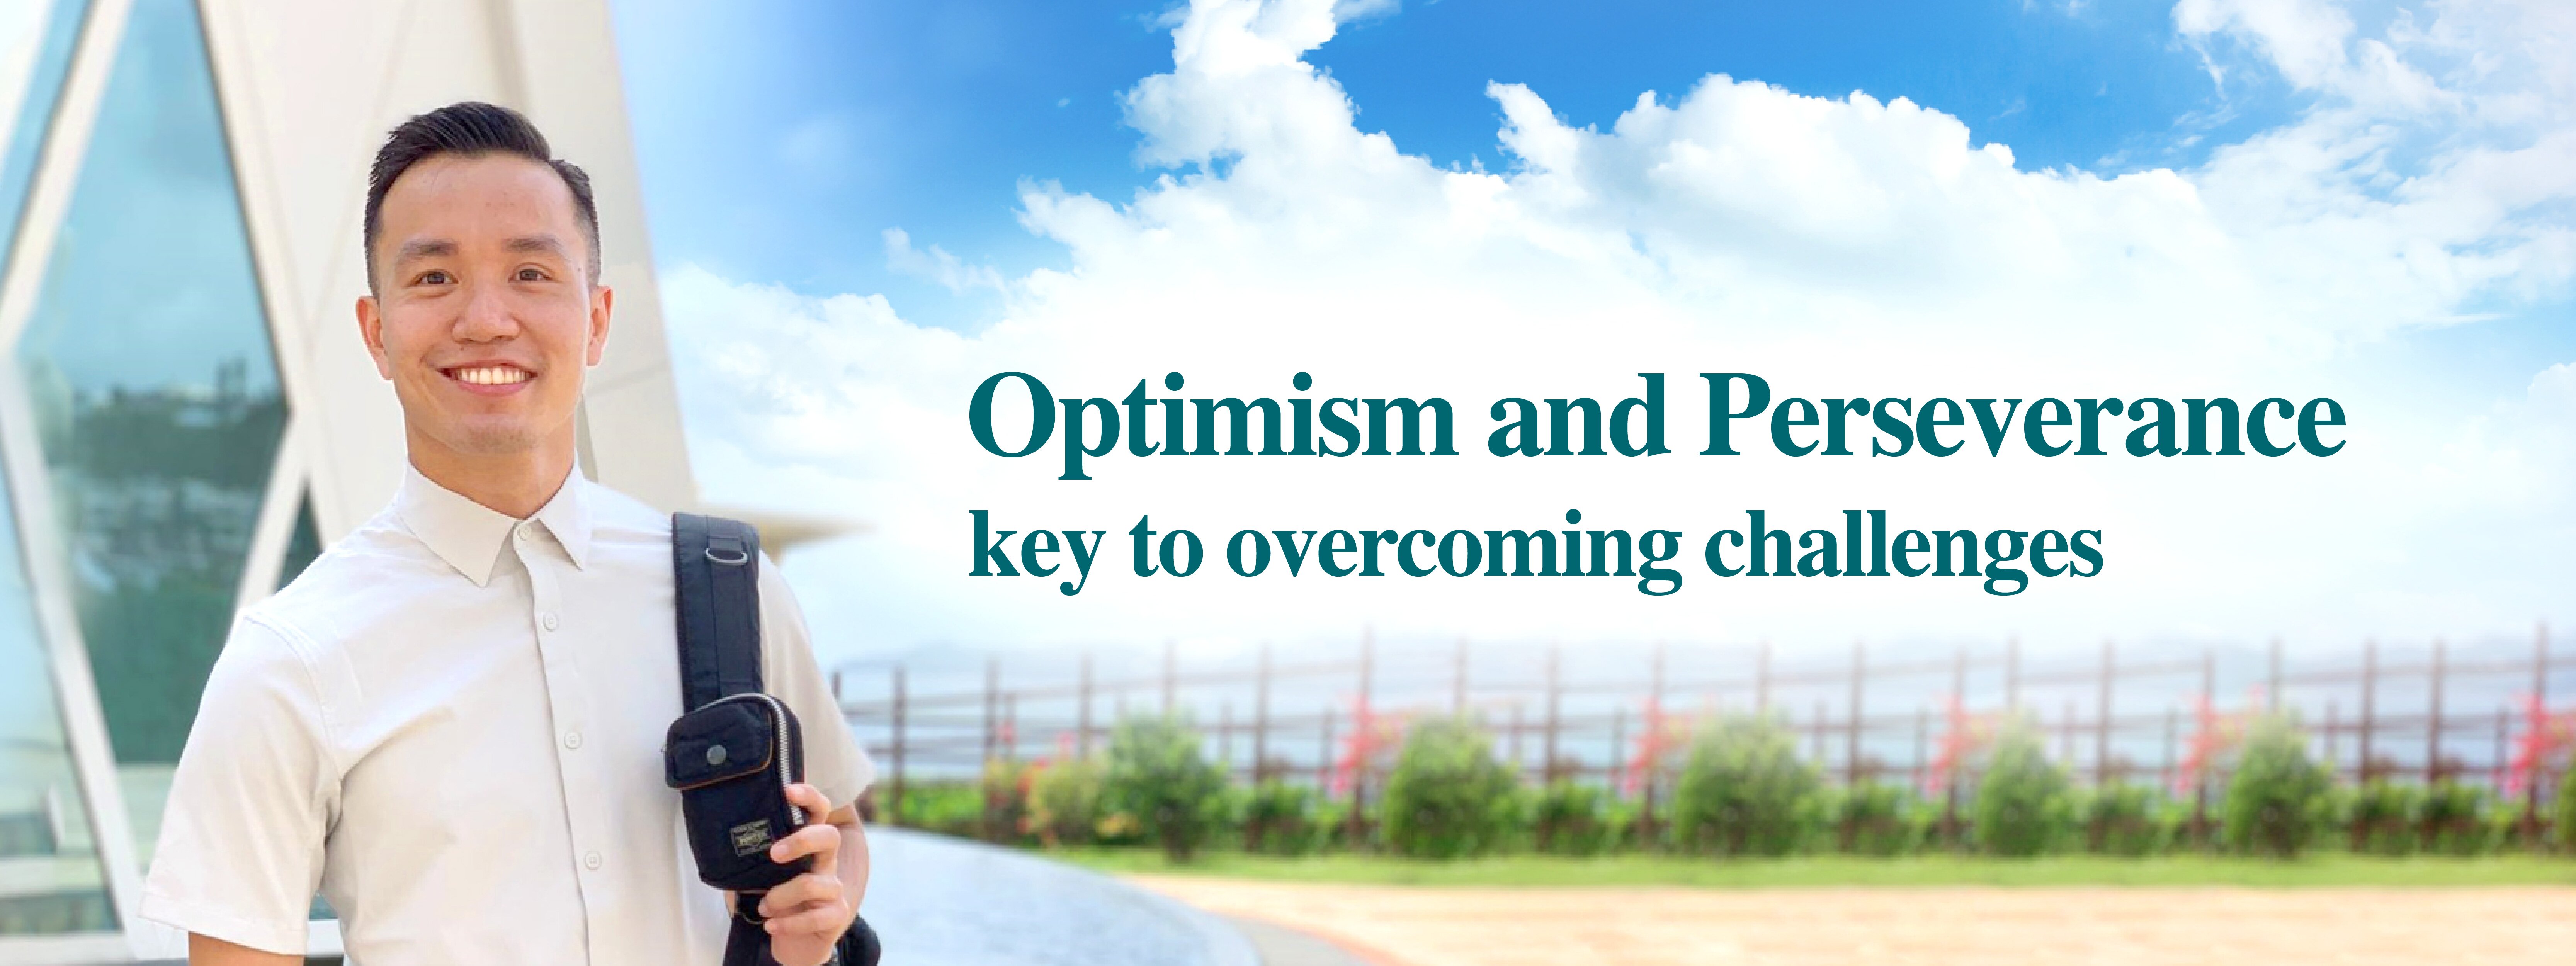 Optimism and perseverance key to overcoming challenges